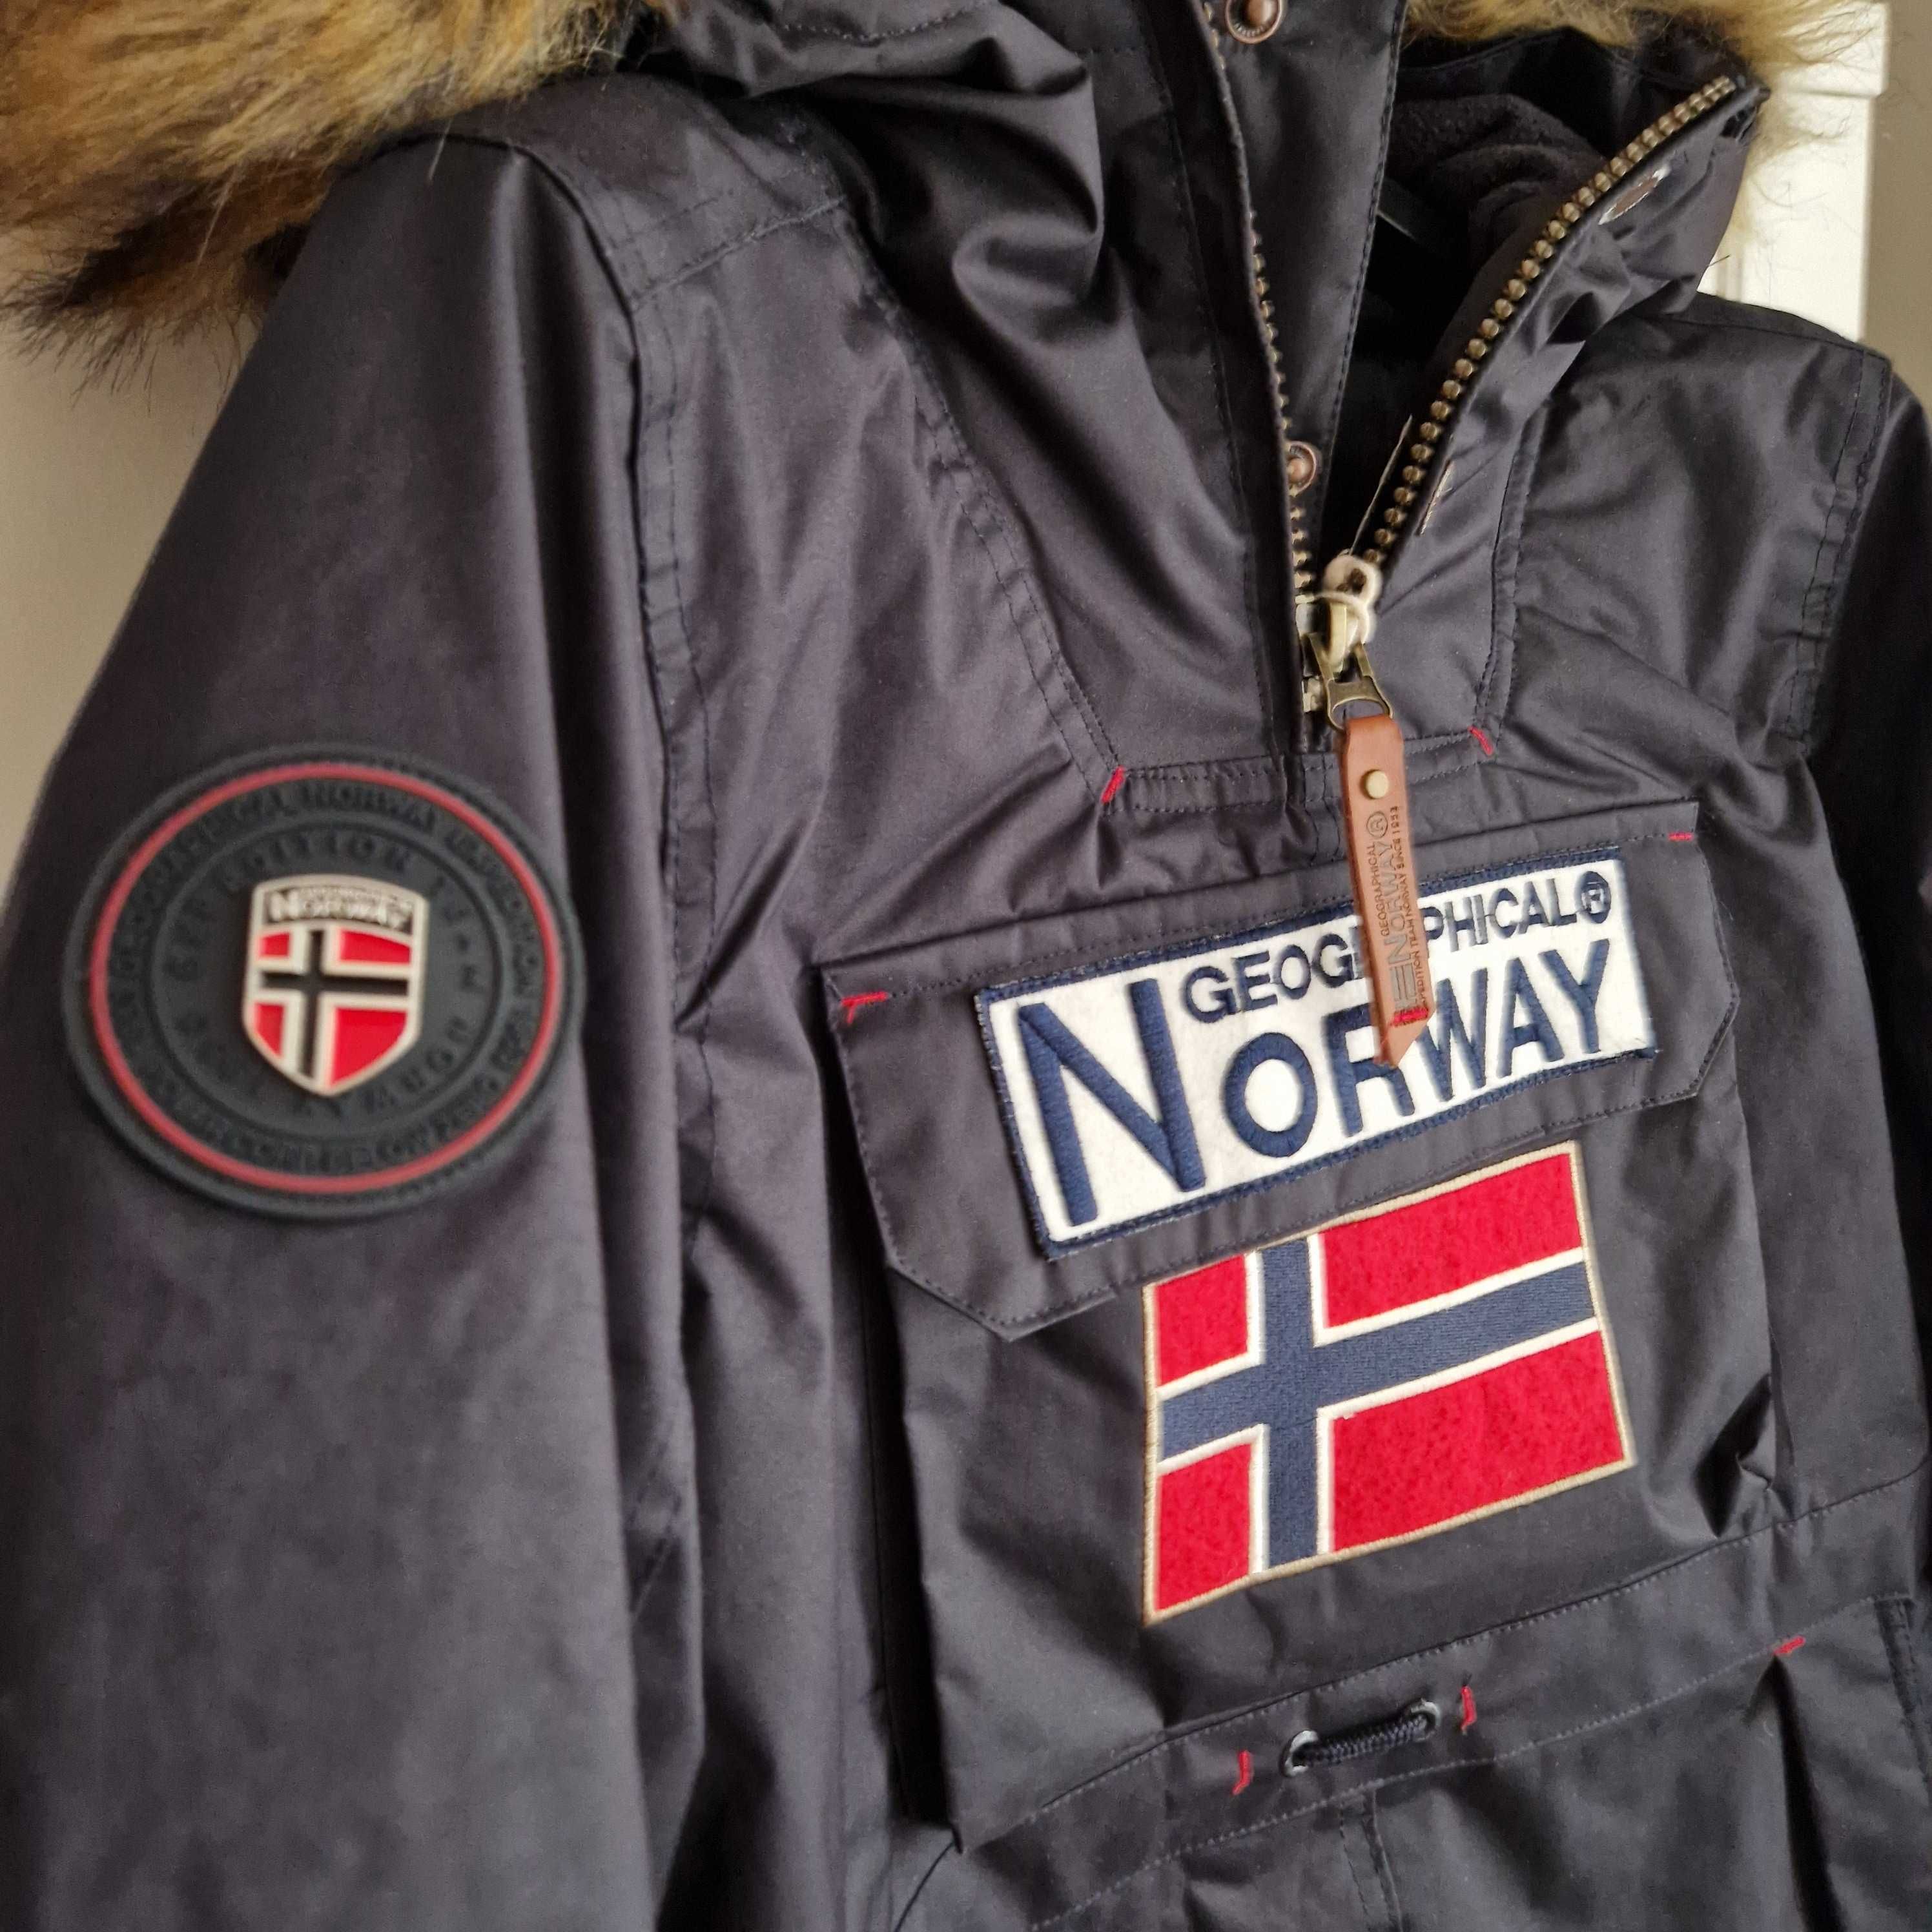 Geaca Geographical Norway 12 ani